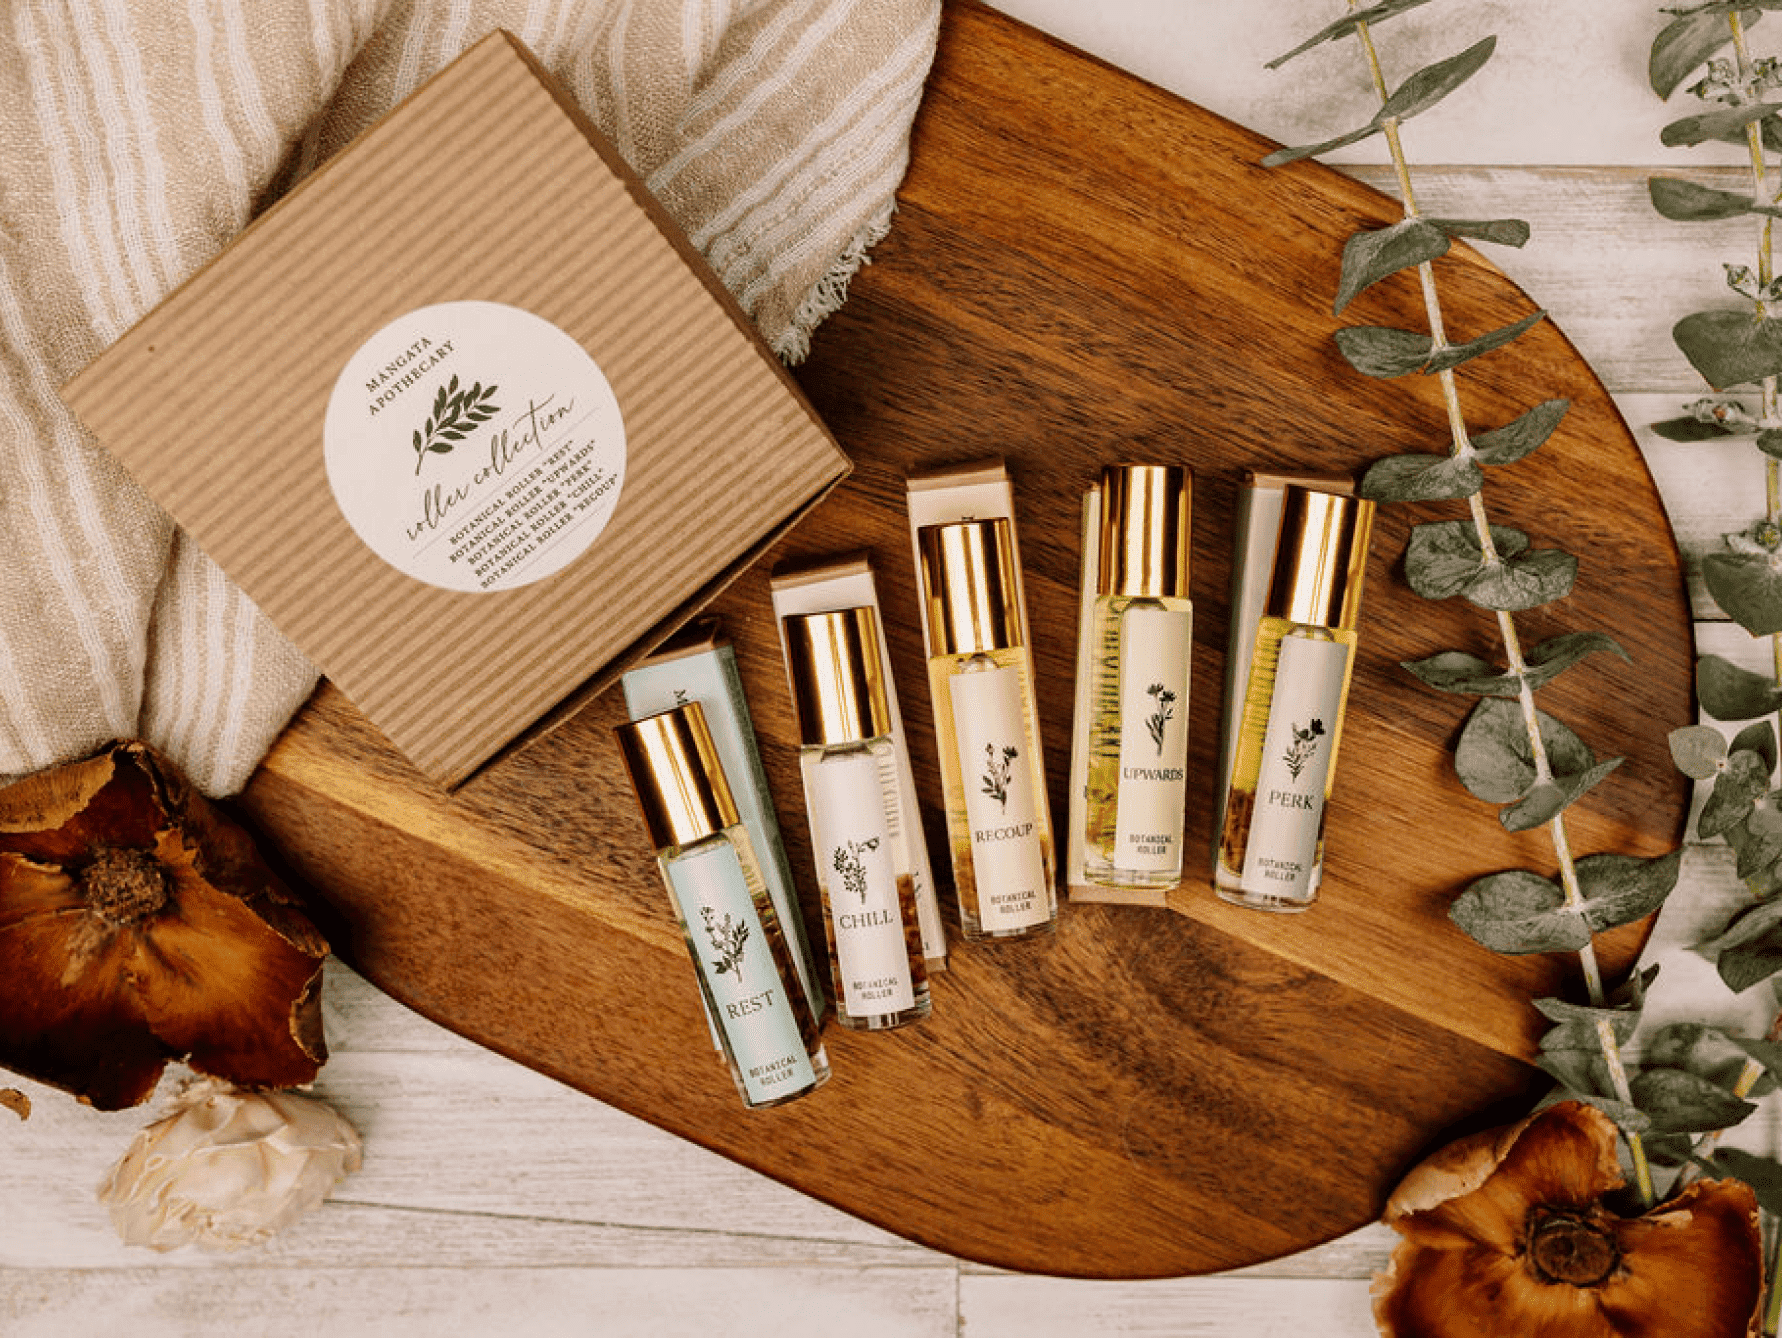 A collection of roller aromatherapy bottles from Mangata Apothecary sit on a wooden board.